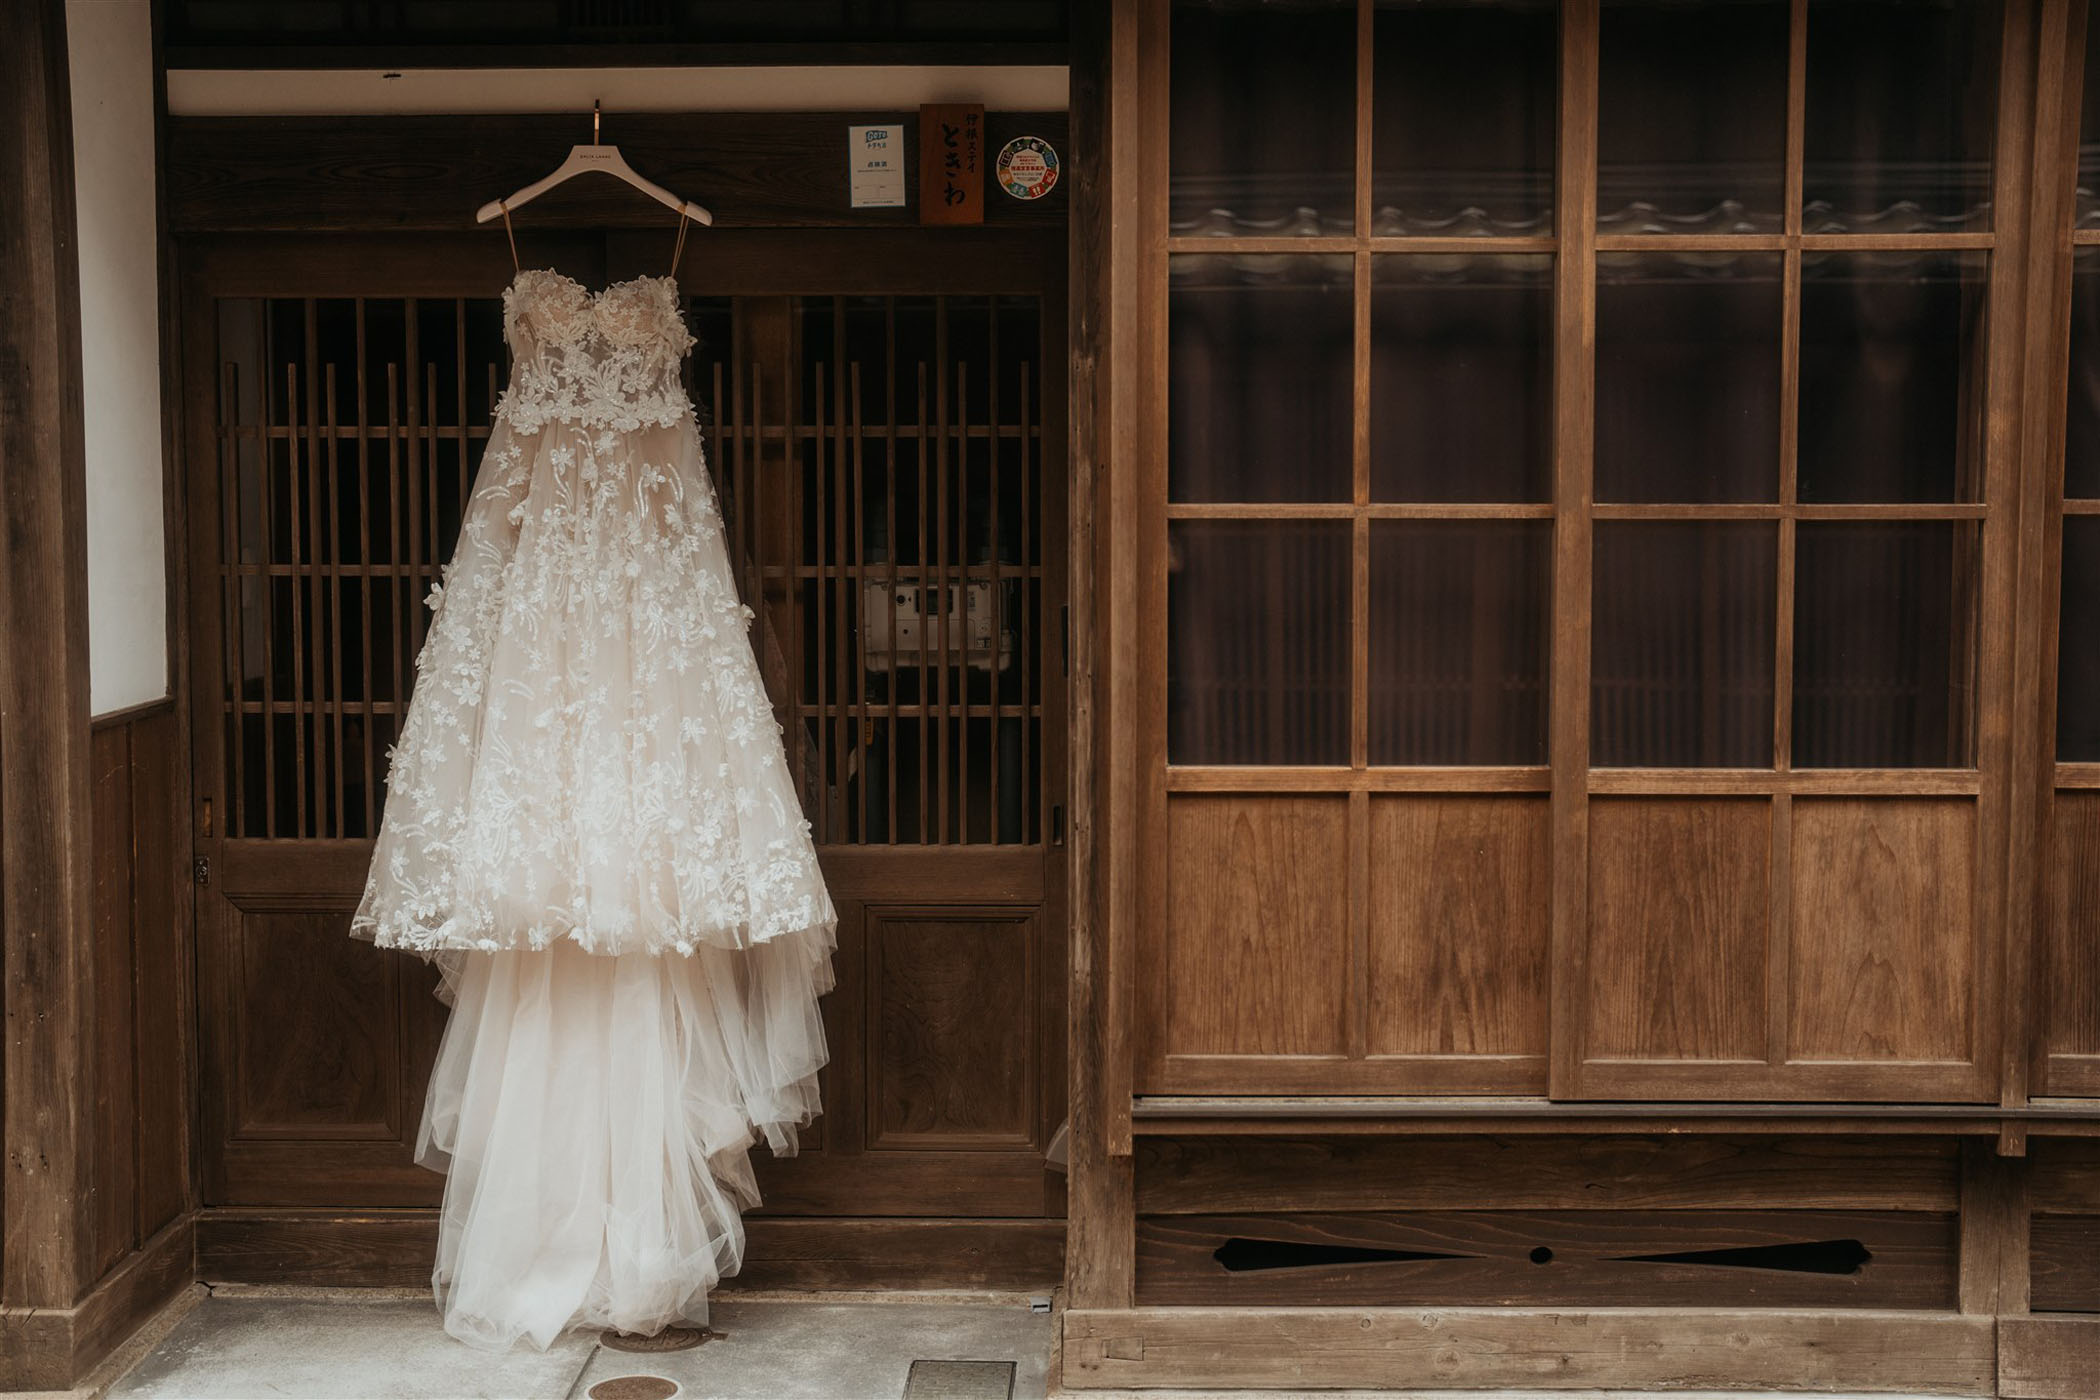 Destination Elopement in Japan with Multiple Outfits